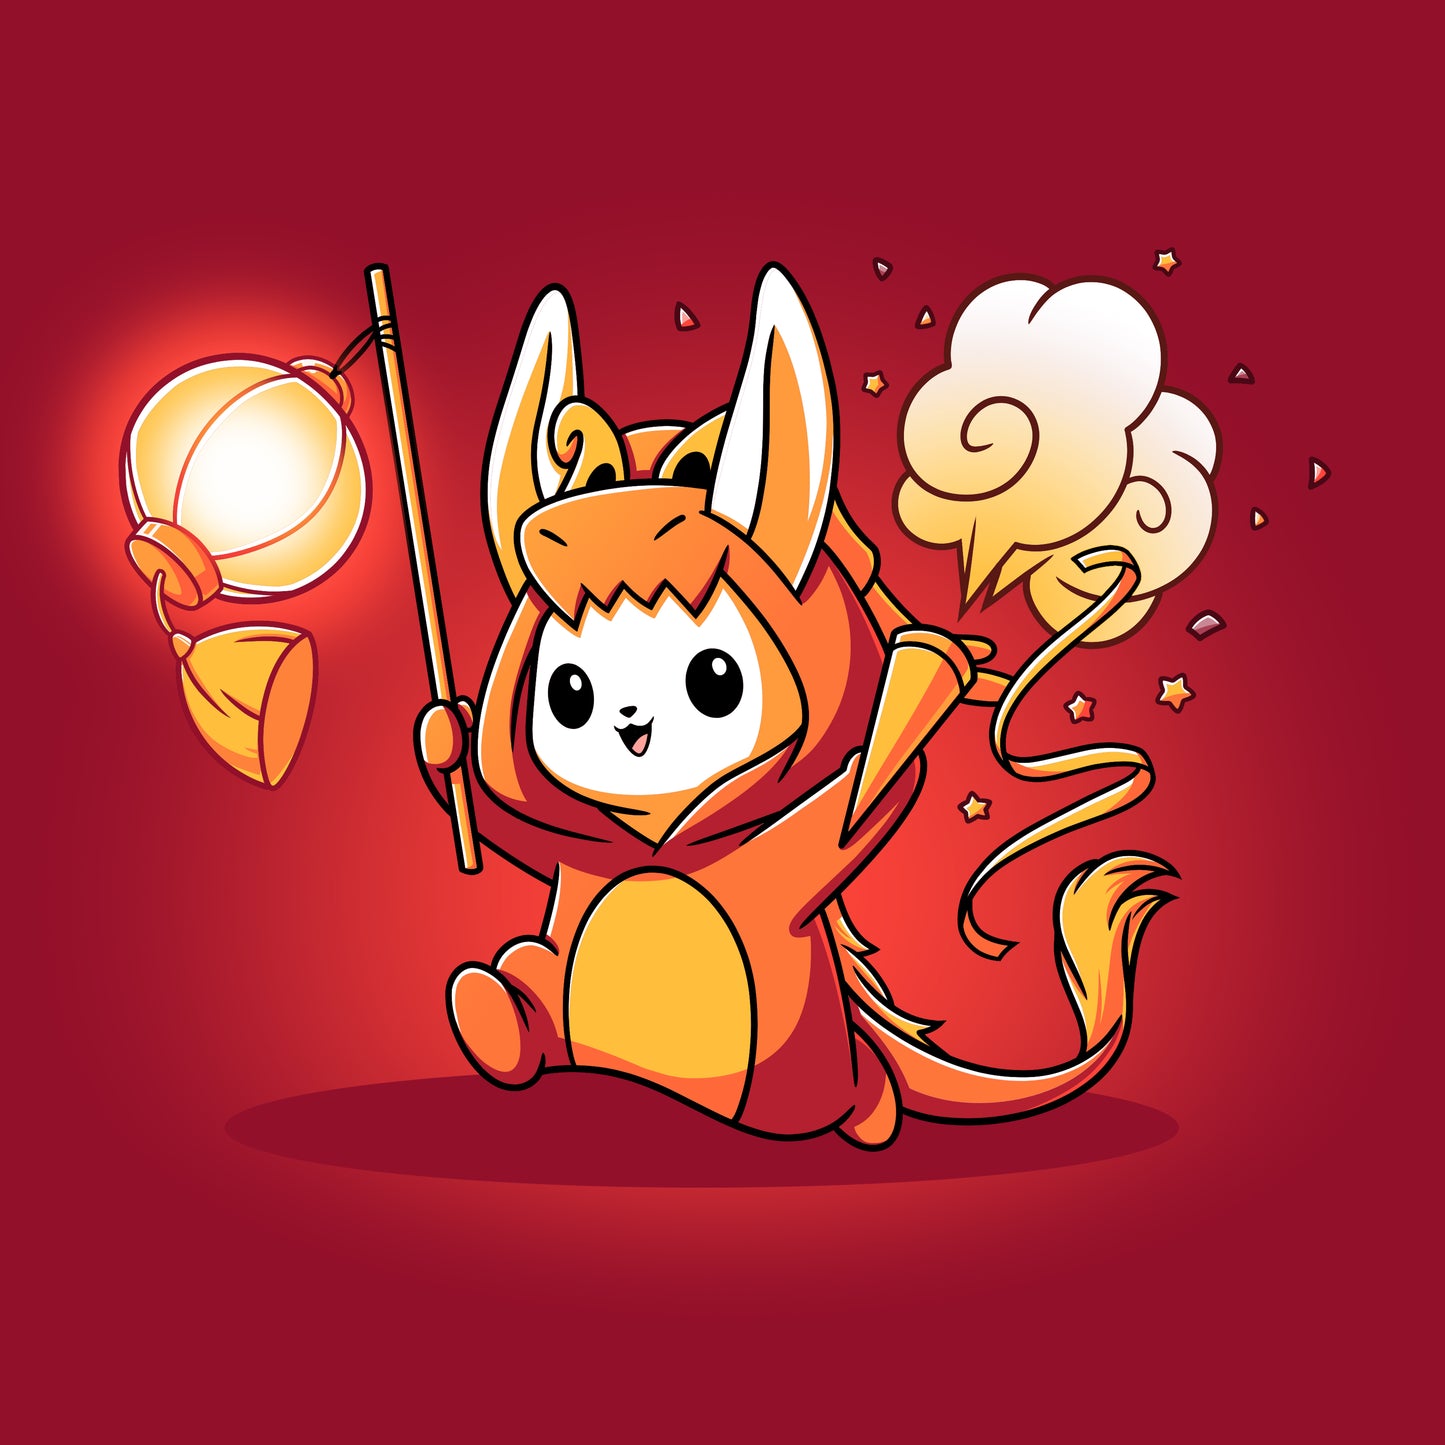 A Year of the Dragon Kigurumi by TeeTurtle, featuring a cartoon Chinese dragon holding a lantern, is perfect for celebrating the Lunar New Year. Dress up in this design on your T-shirt to embrace the festive spirit and add a touch of playfulness to your style.